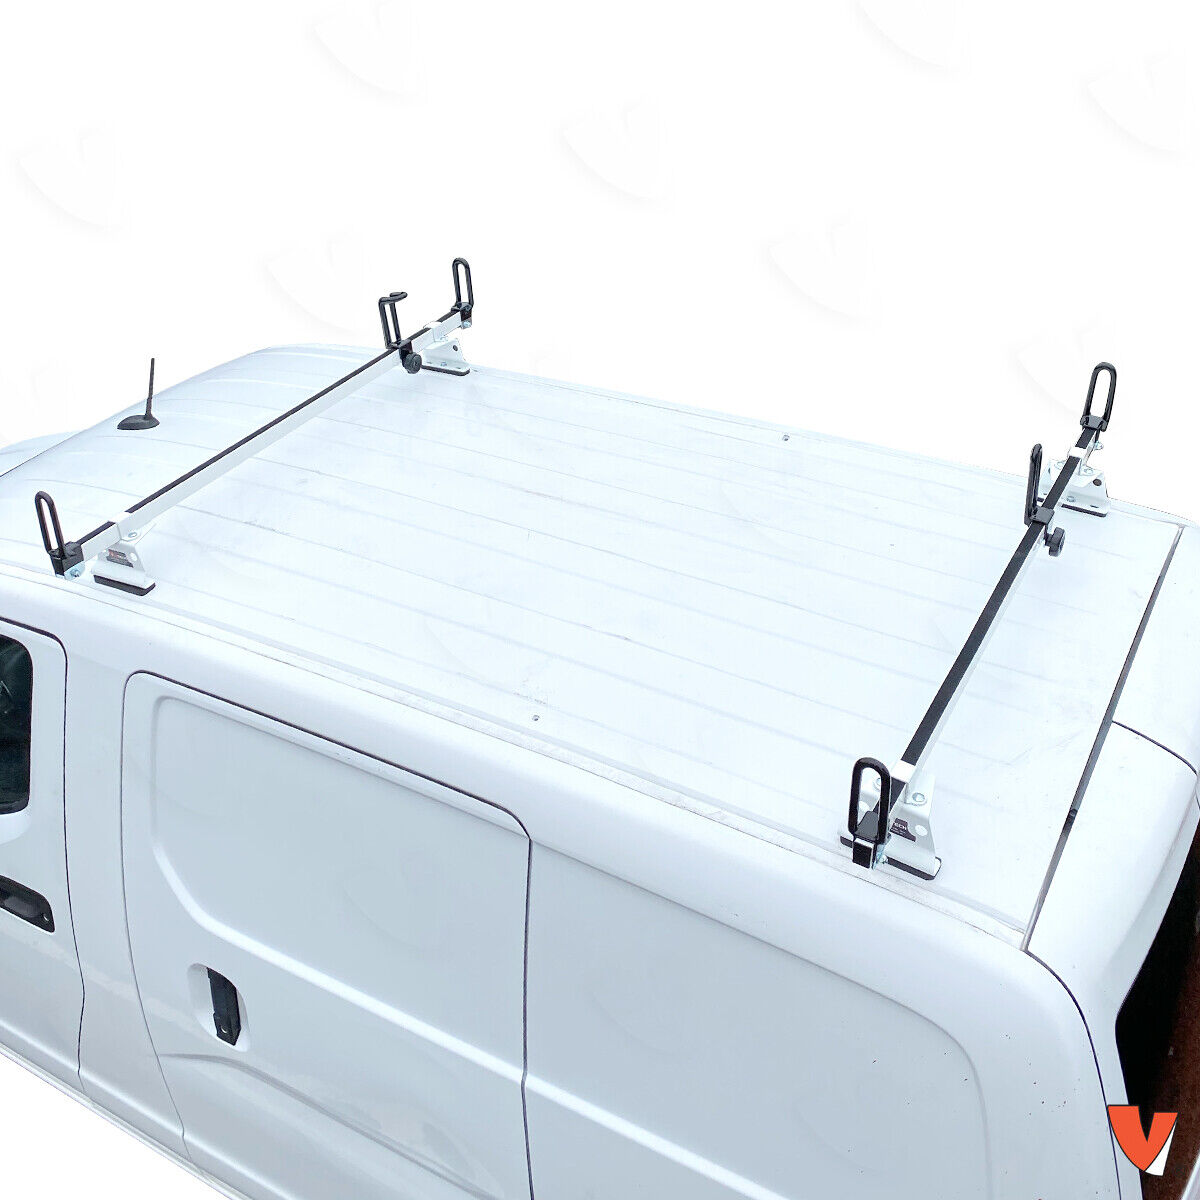 Heavy duty 2 bar white GFY ladder roof rack system Fits: Nissan NV200 2013-on